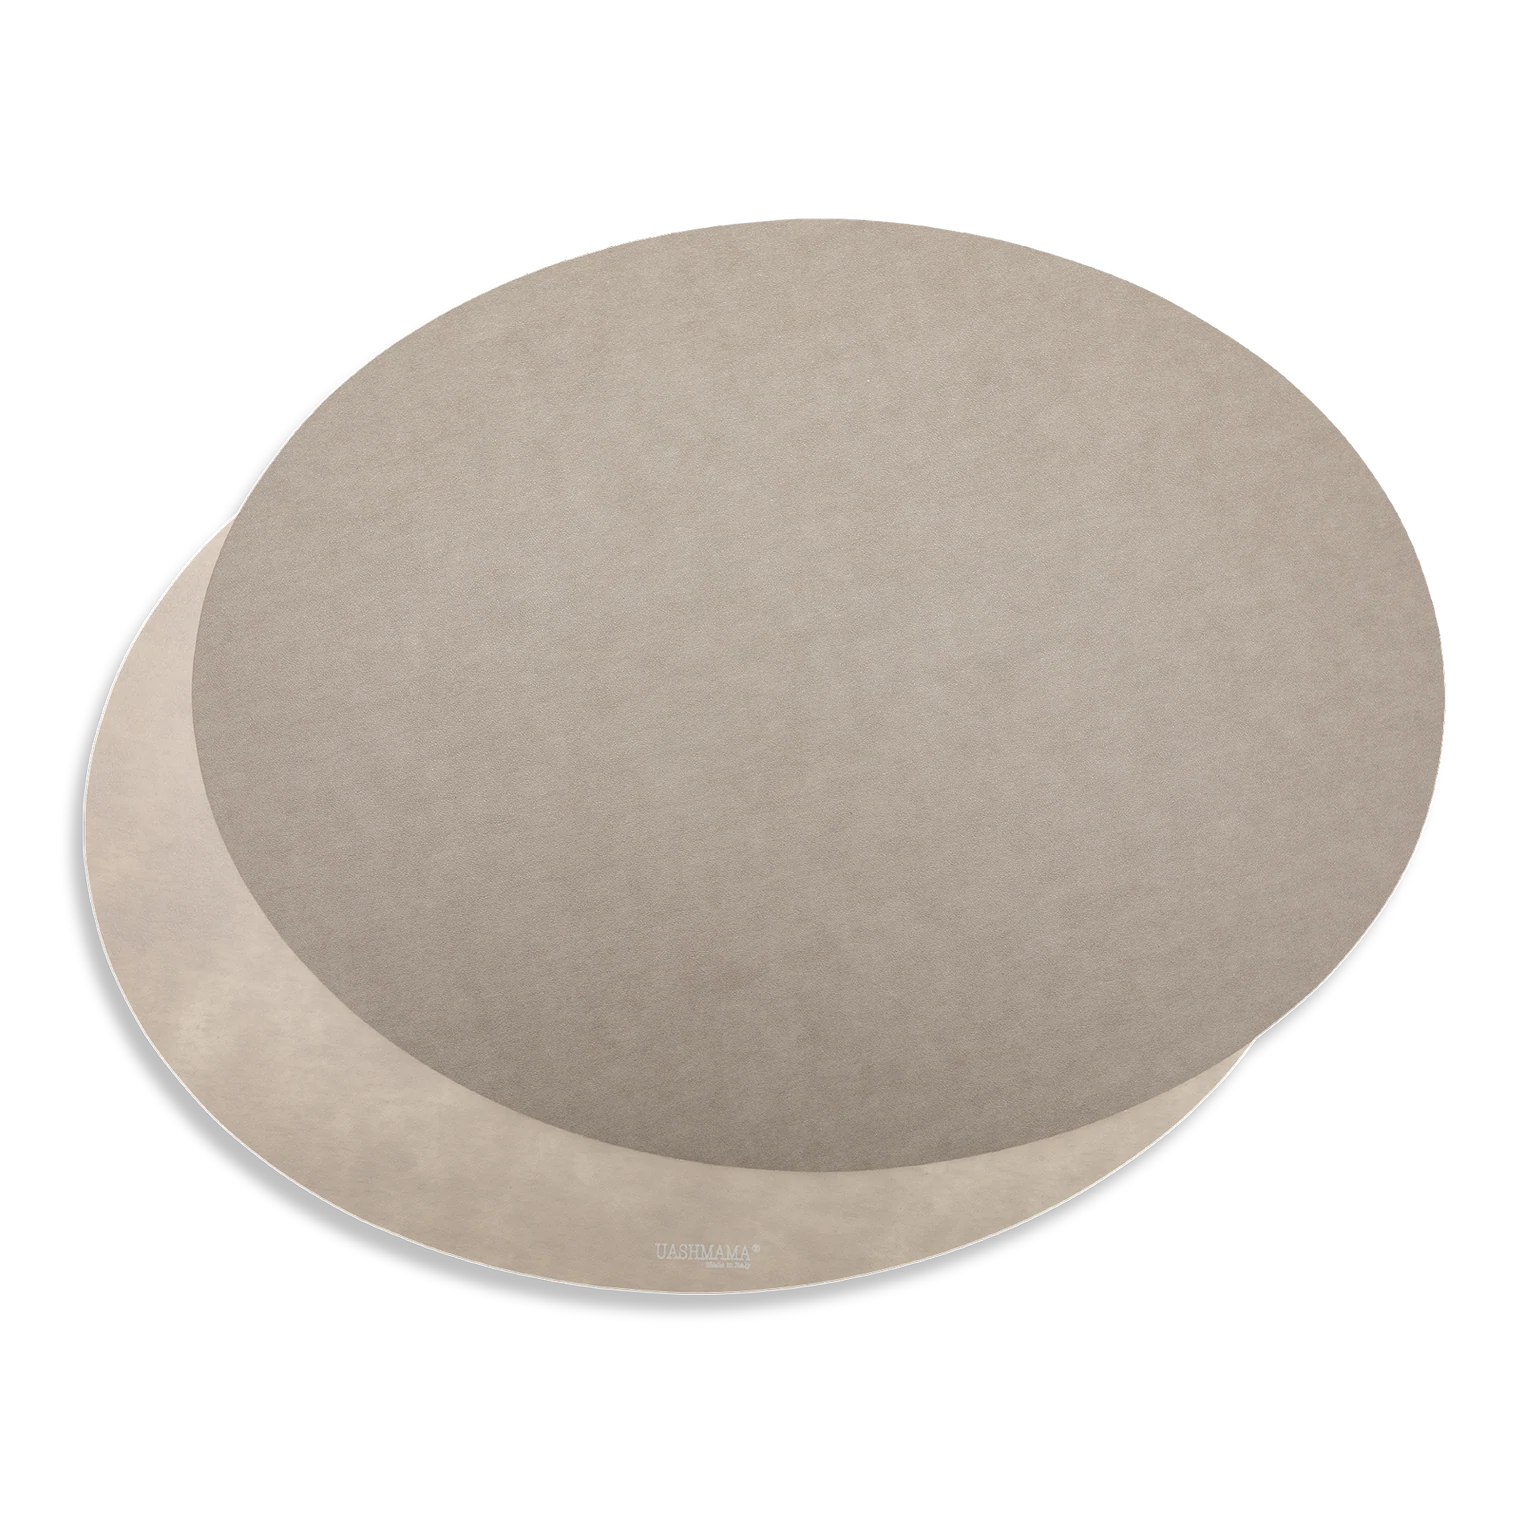 Coto Oval Placemat - Grey/Cachemire